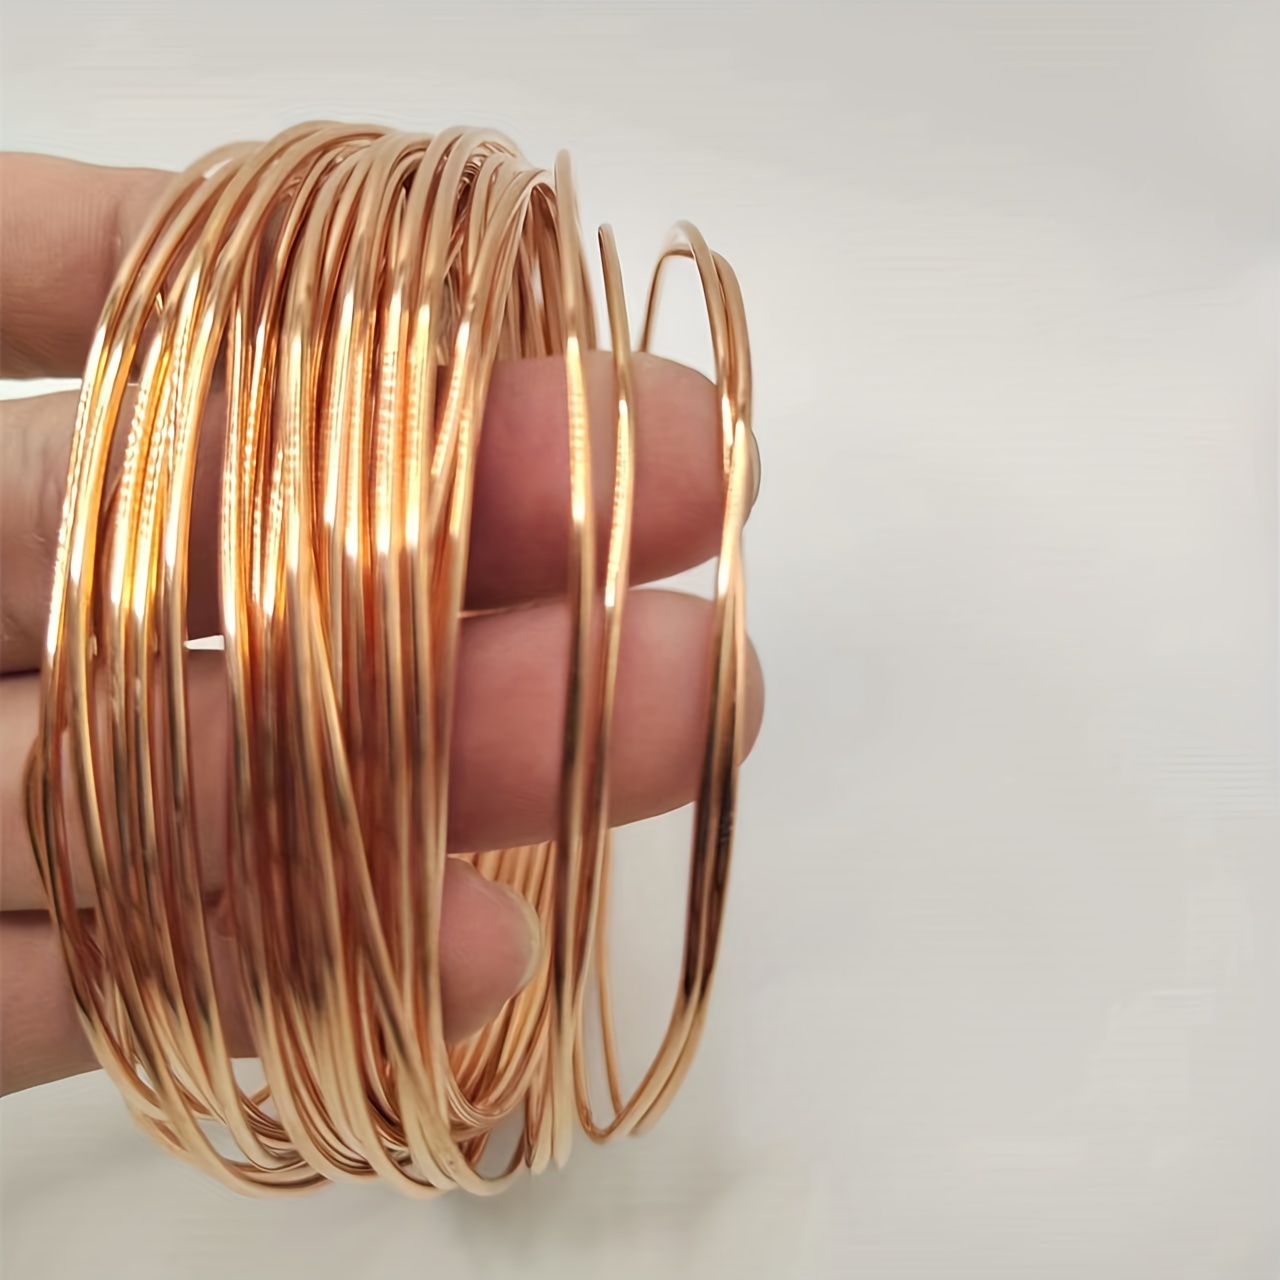 16 Gauge Bare Copper Wire 1.6mm (one Roll) 10 Meters Pure Copper